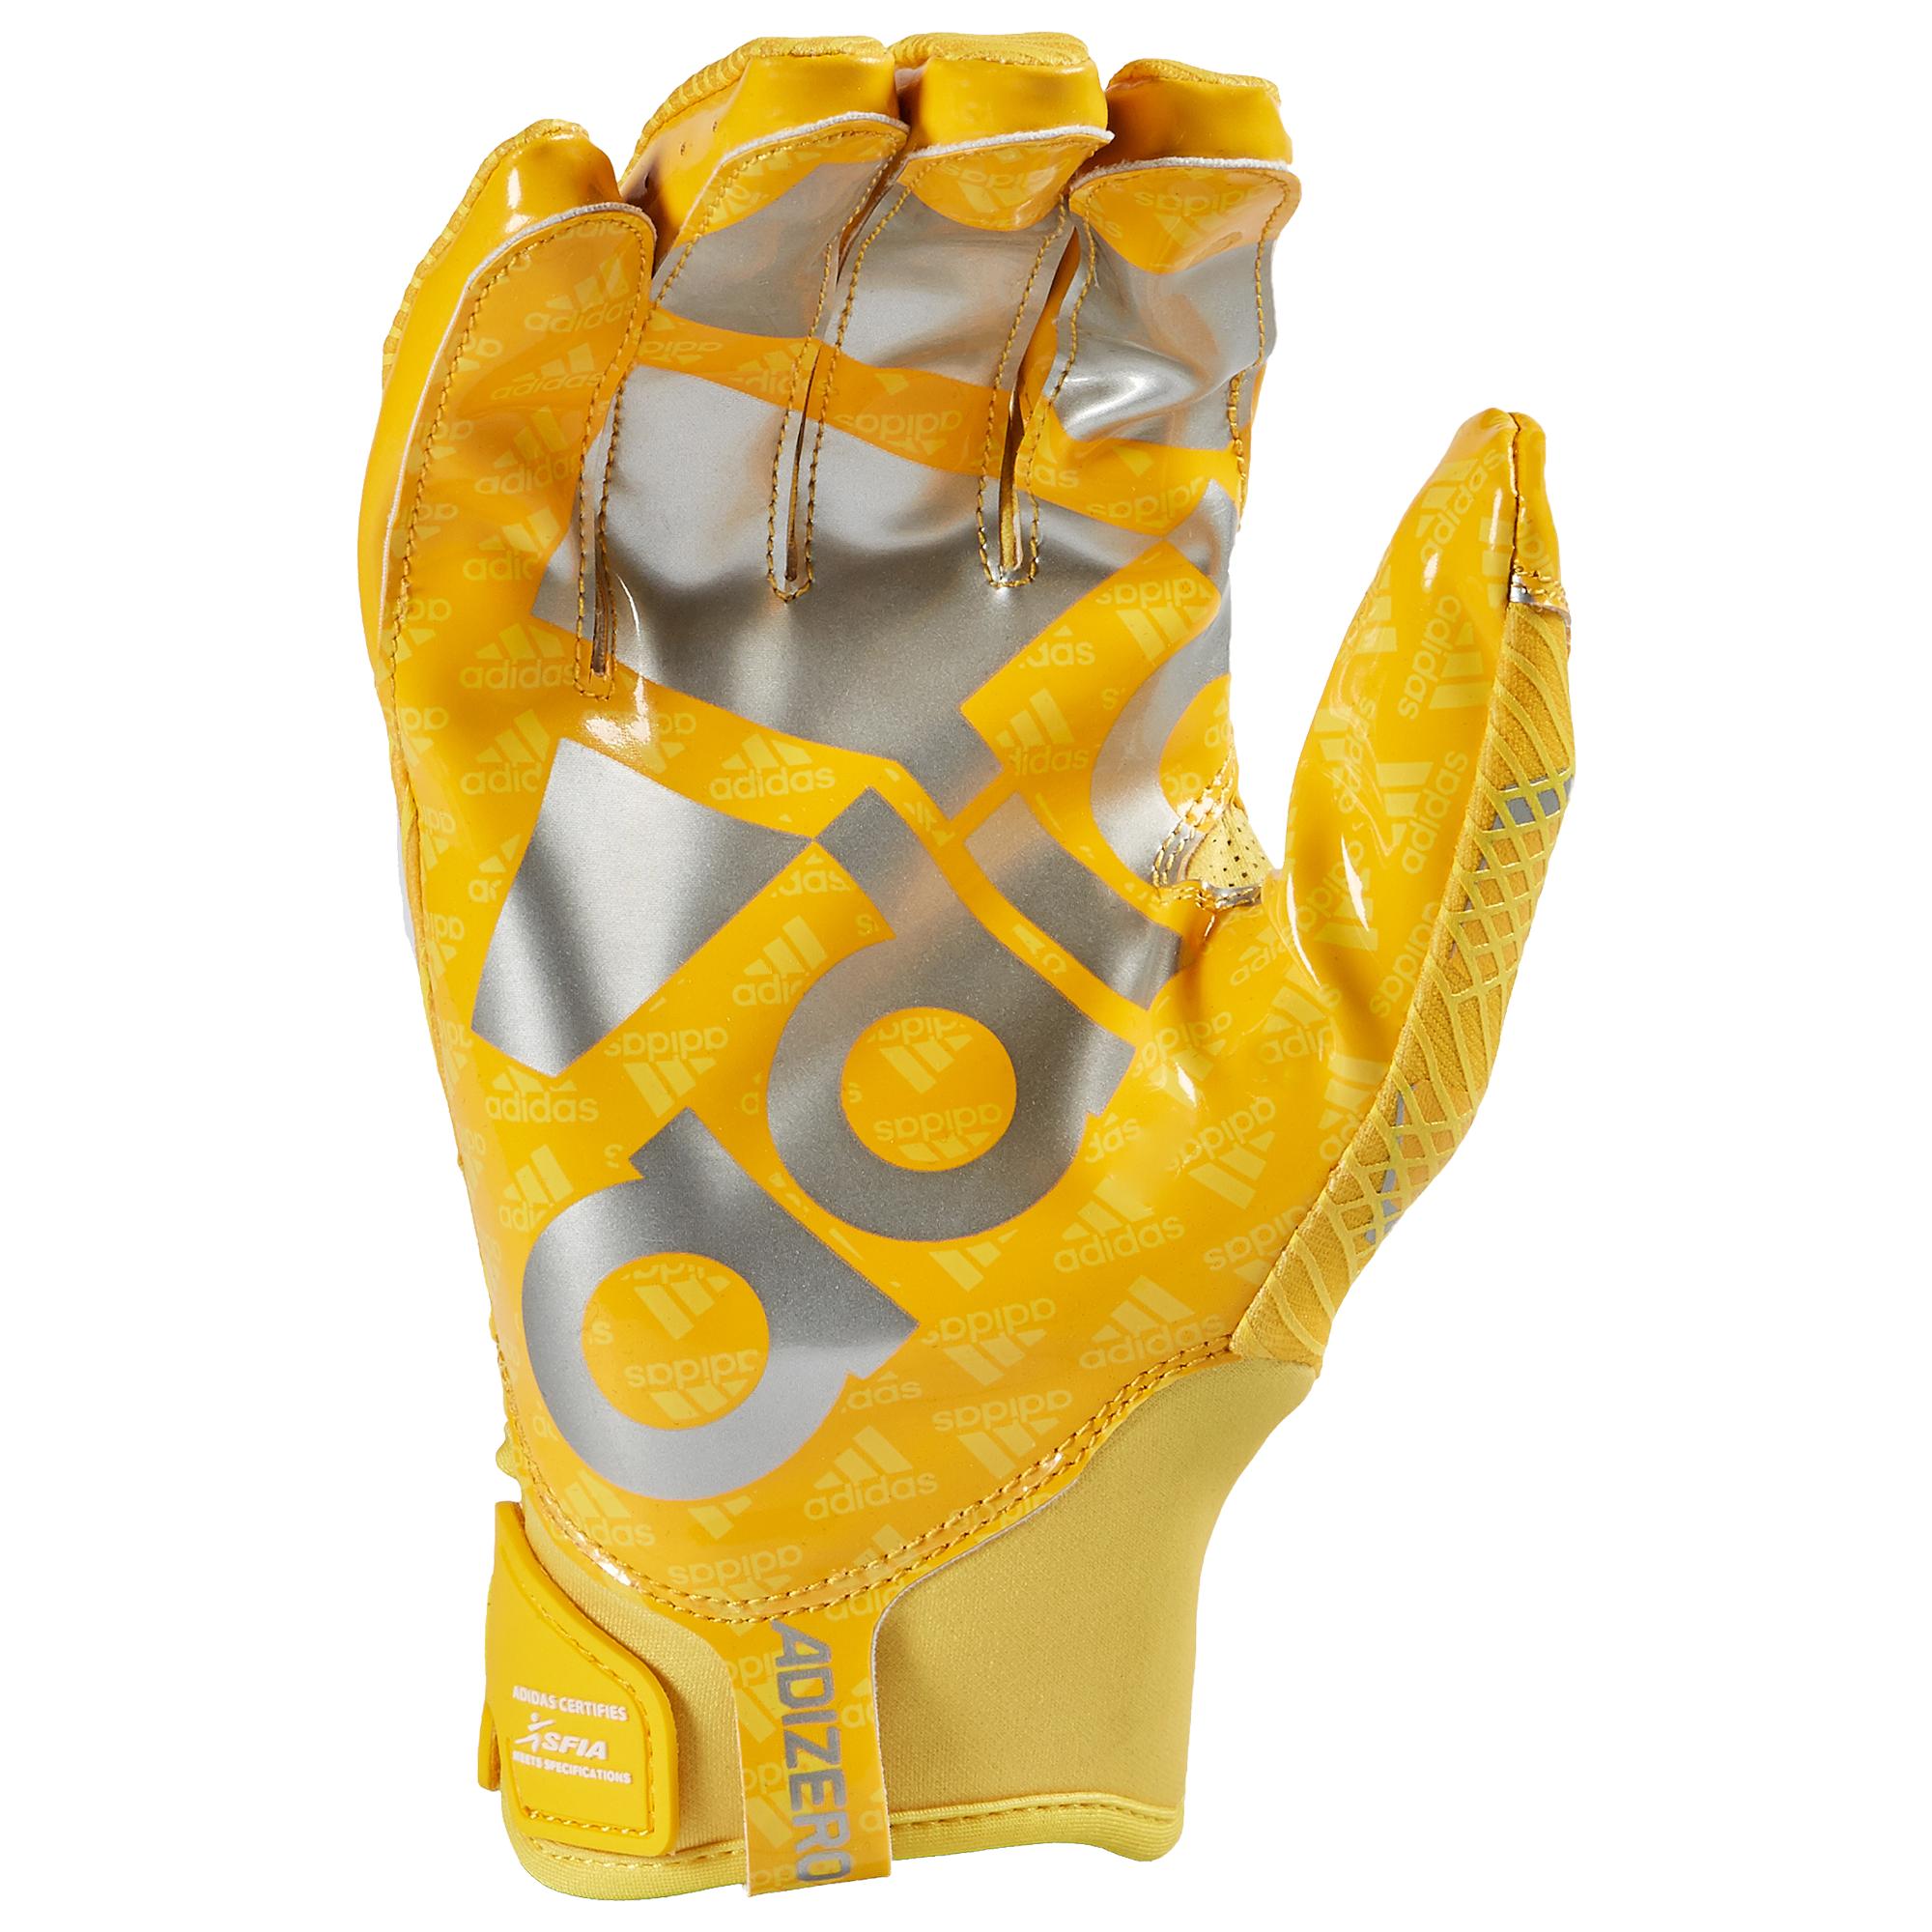 Adidas Yellow Gloves Store, SAVE 35% - aveclumiere.com